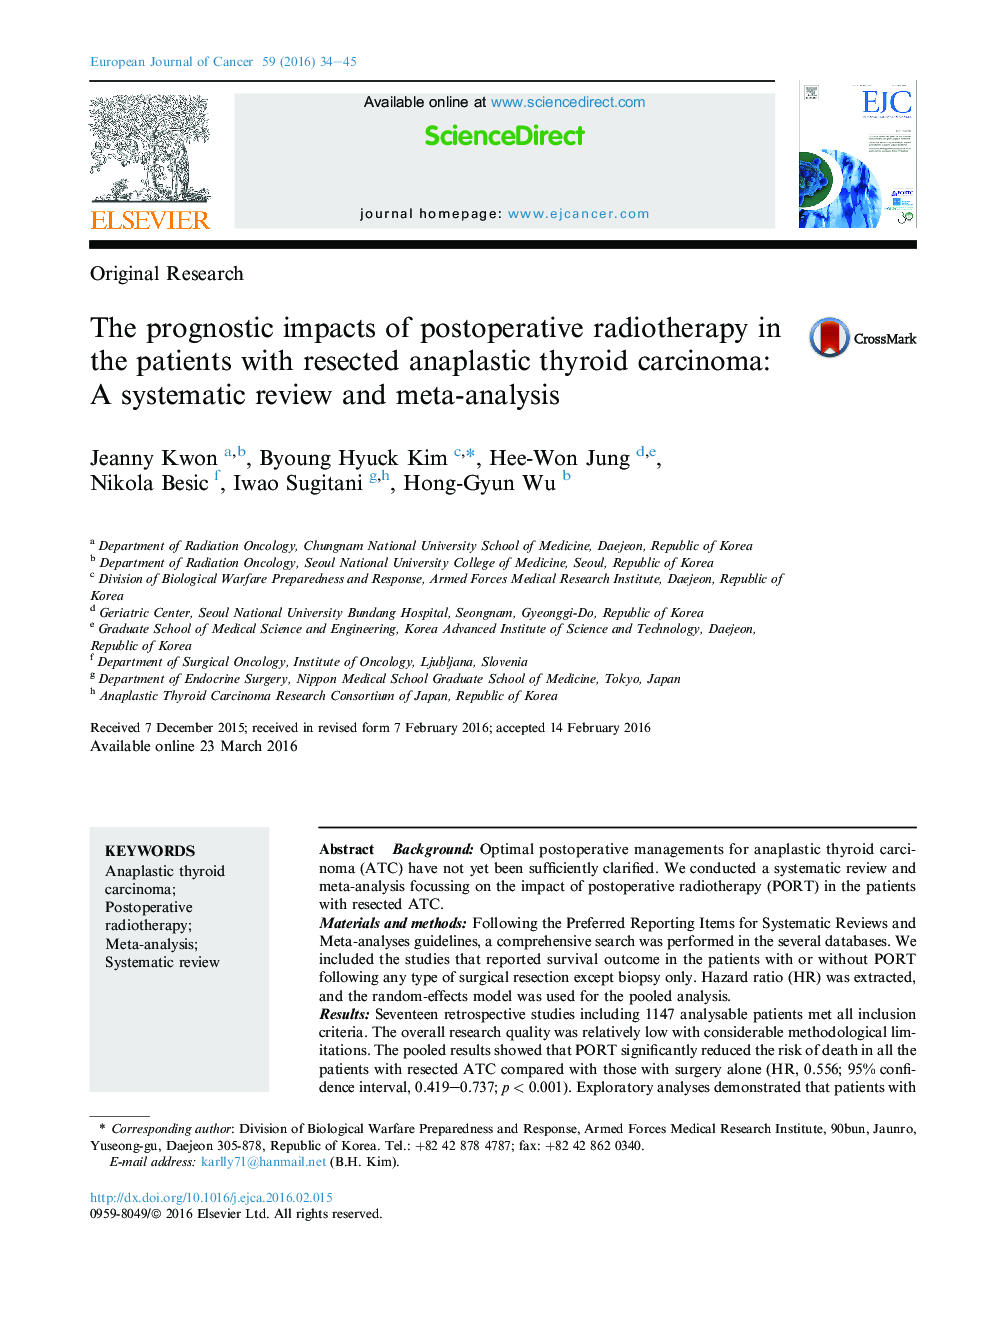 The prognostic impacts of postoperative radiotherapy in the patients with resected anaplastic thyroid carcinoma: A systematic review and meta-analysis